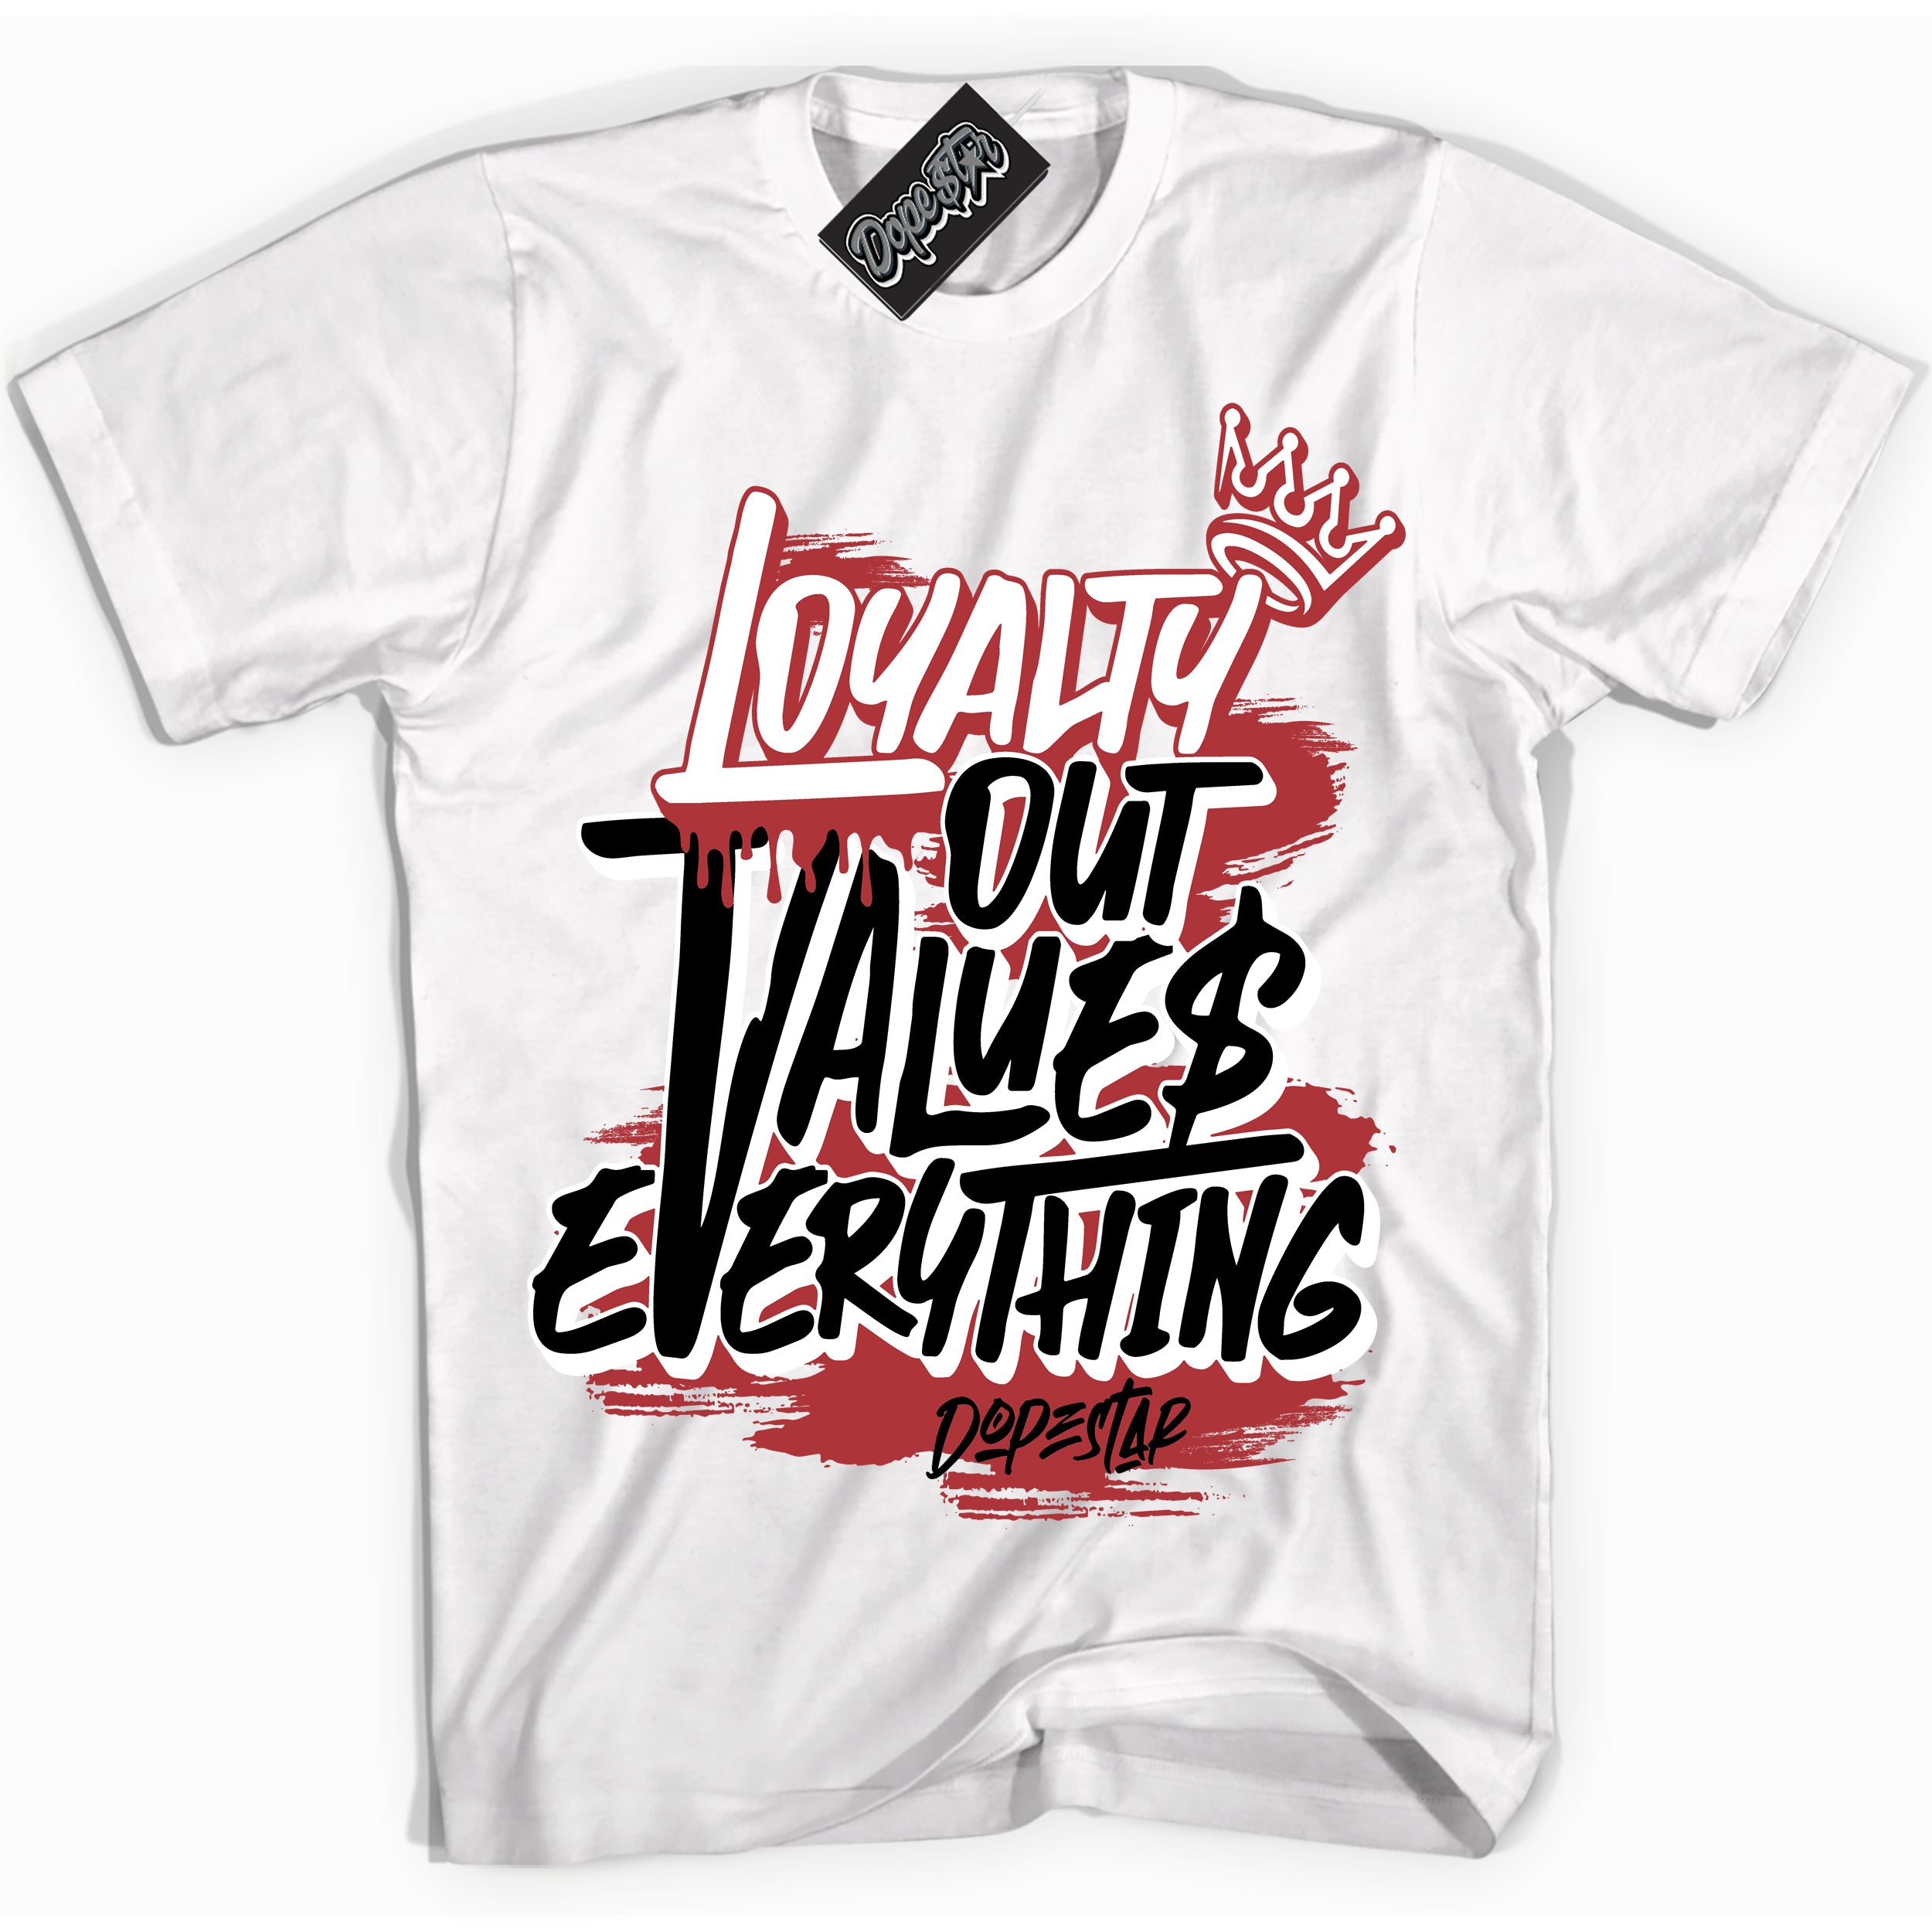 Cool White Shirt with “ Loyalty Out Values Everything” design that perfectly matches Chicago 2s Sneakers.